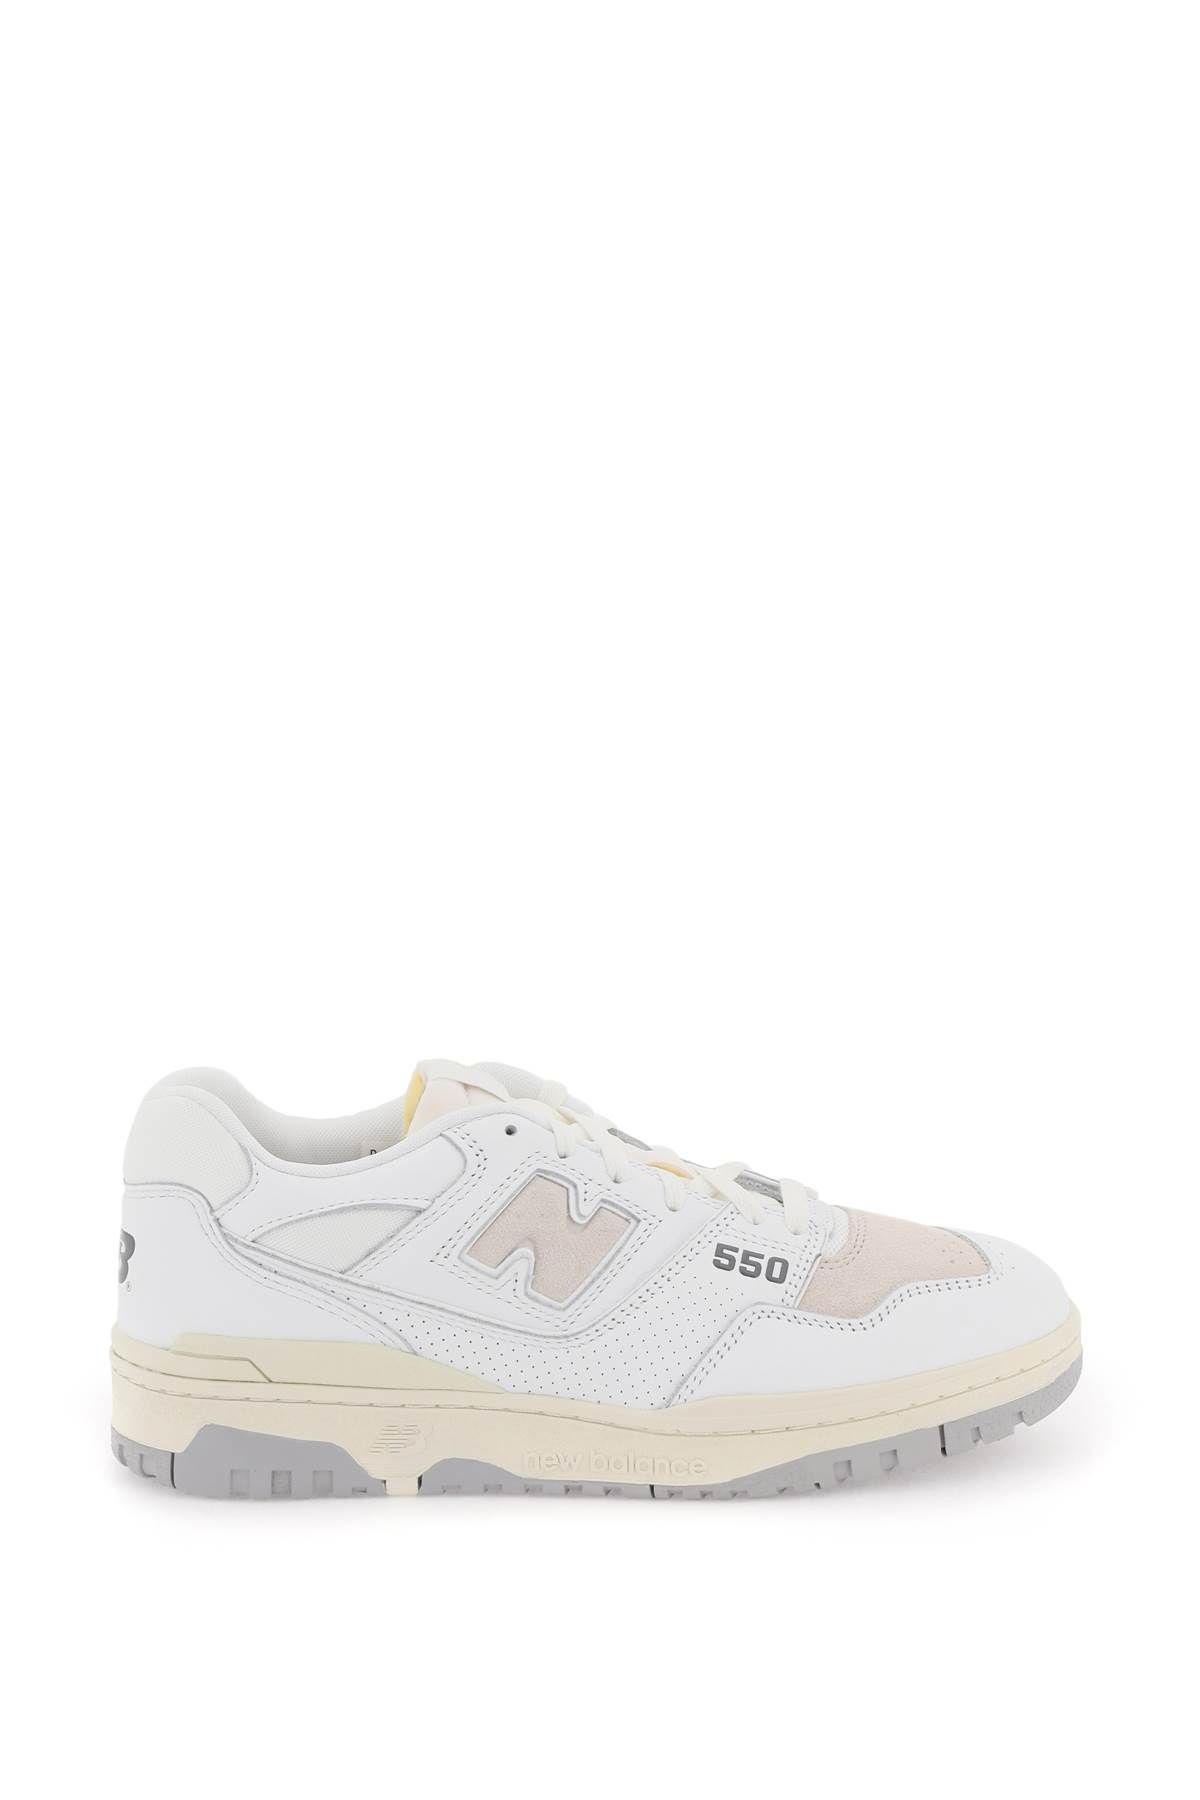 New Balance 550 Sneakers In Beige,white